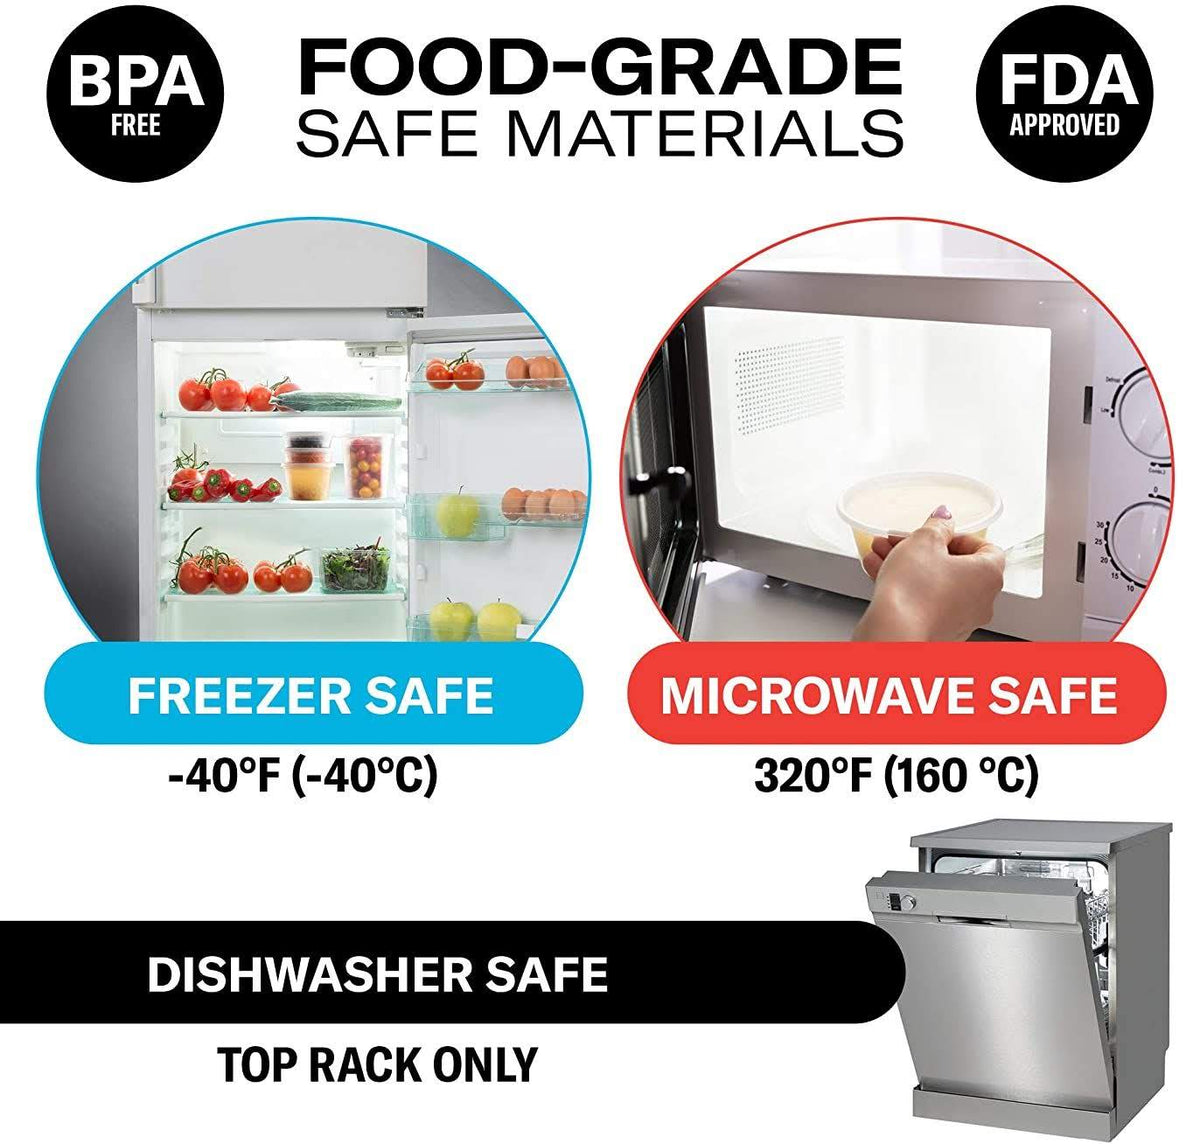 32 oz. Microwavable Translucent Plastic Deli Container and Lid Combo Pack - 240/case